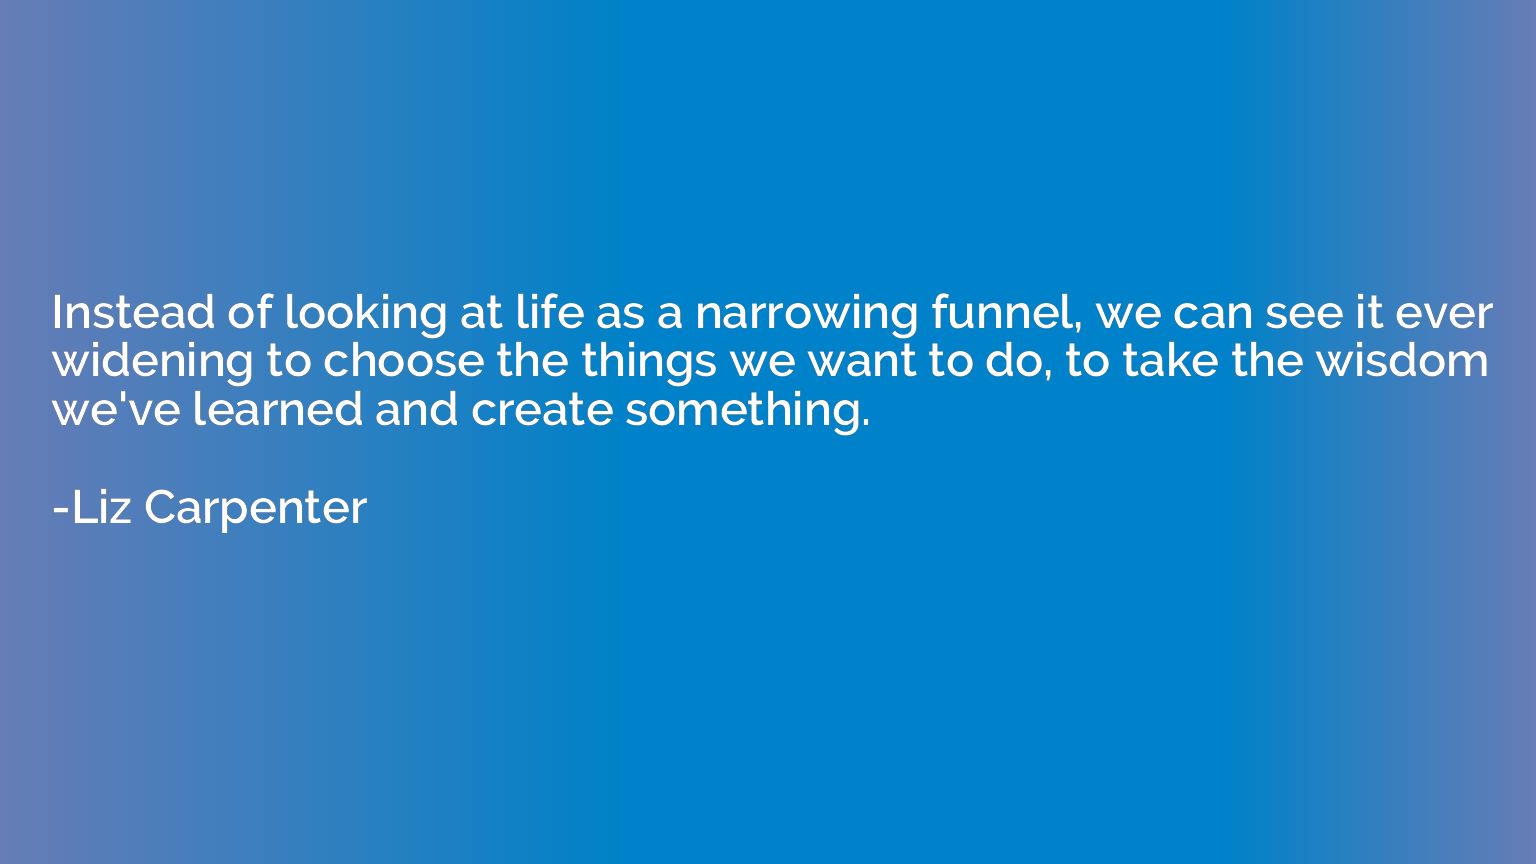 Instead of looking at life as a narrowing funnel, we can see